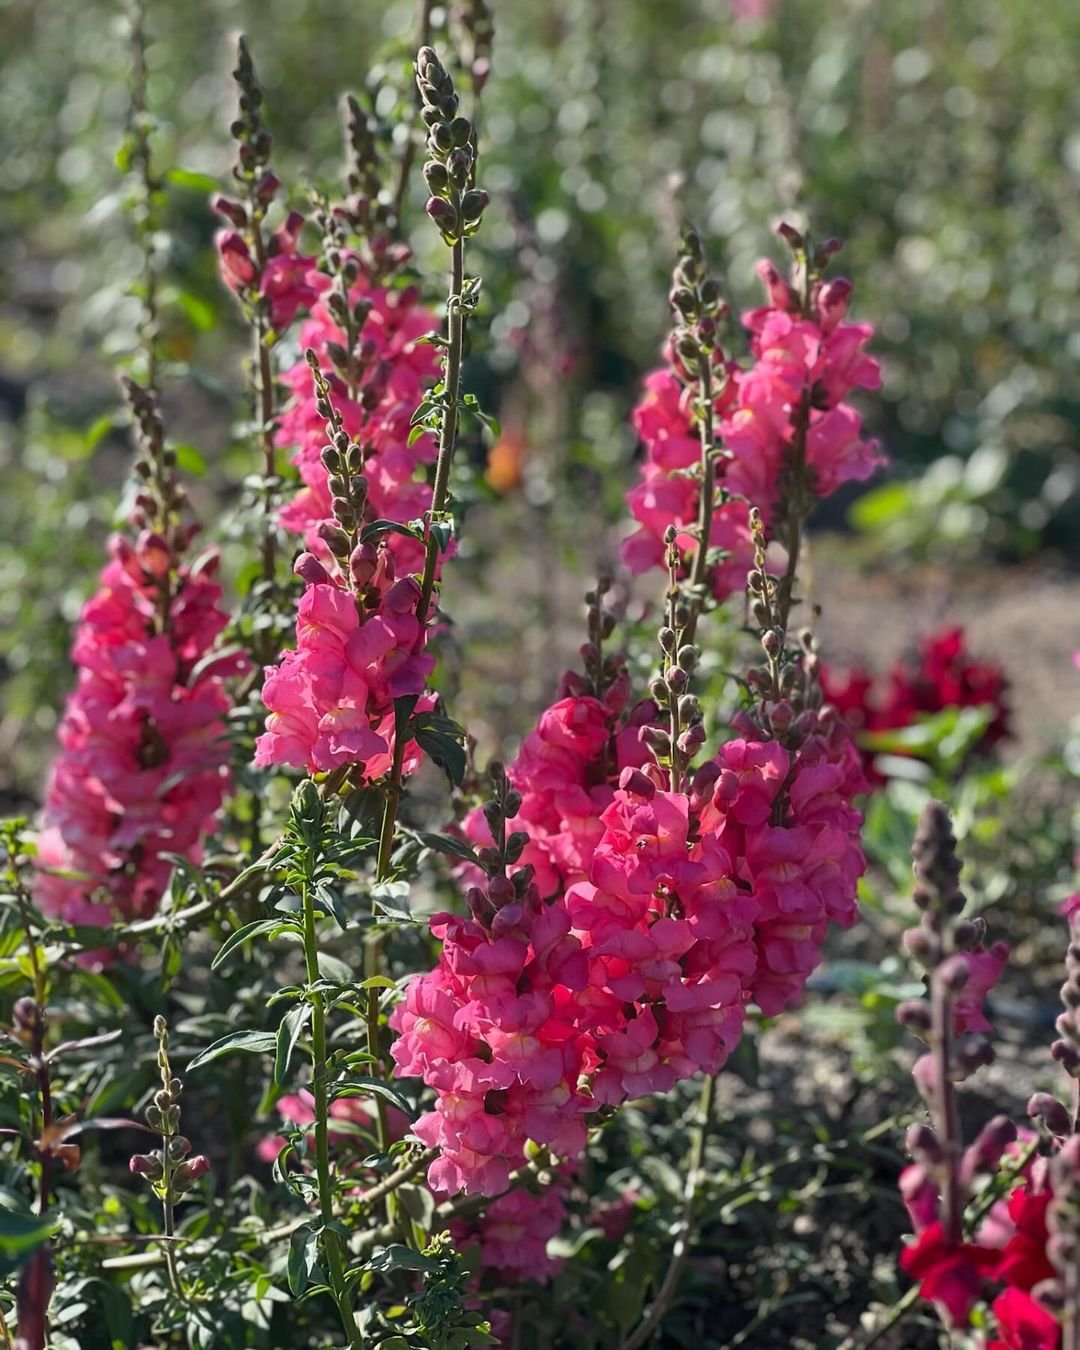 A vibrant field of pink Snapdragon flowers blooming in a picturesque field.